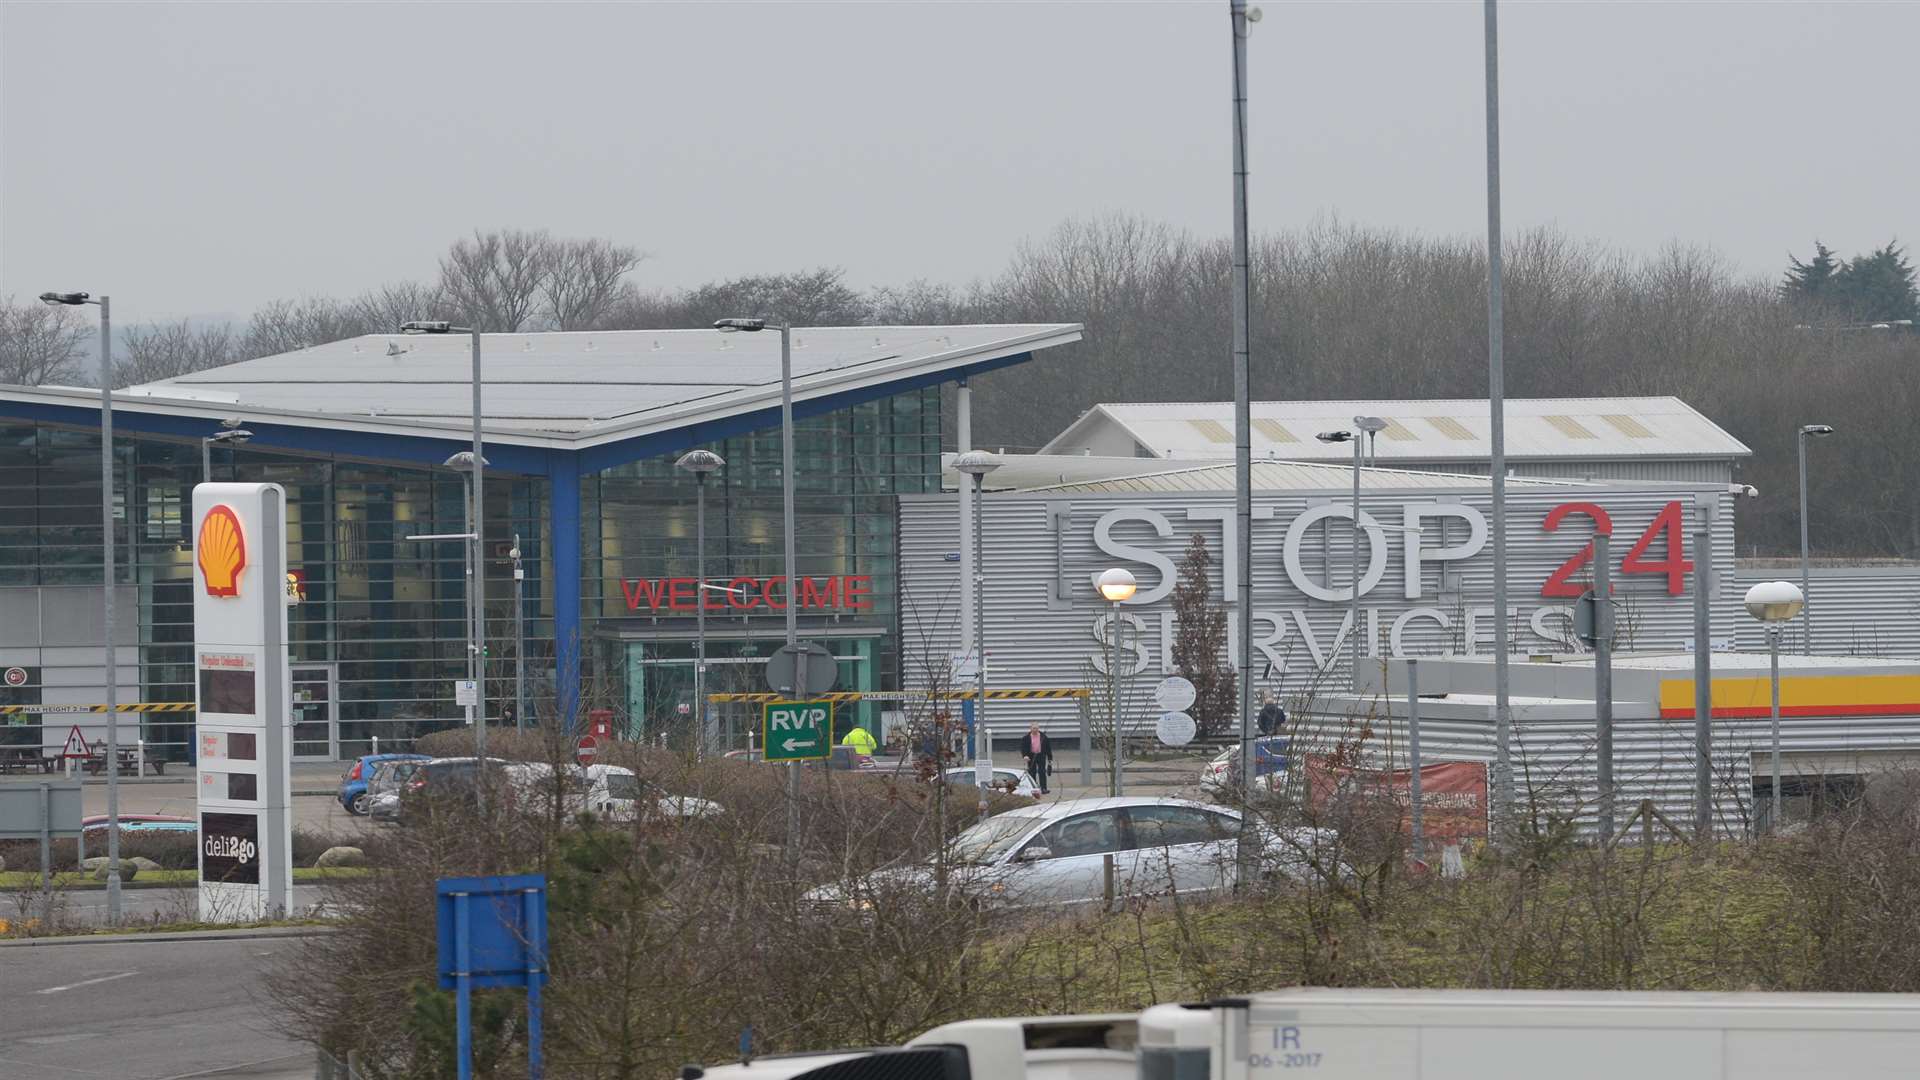 The proposed lorry park would be near Stop24 Services and lorry park Junction 11, M20